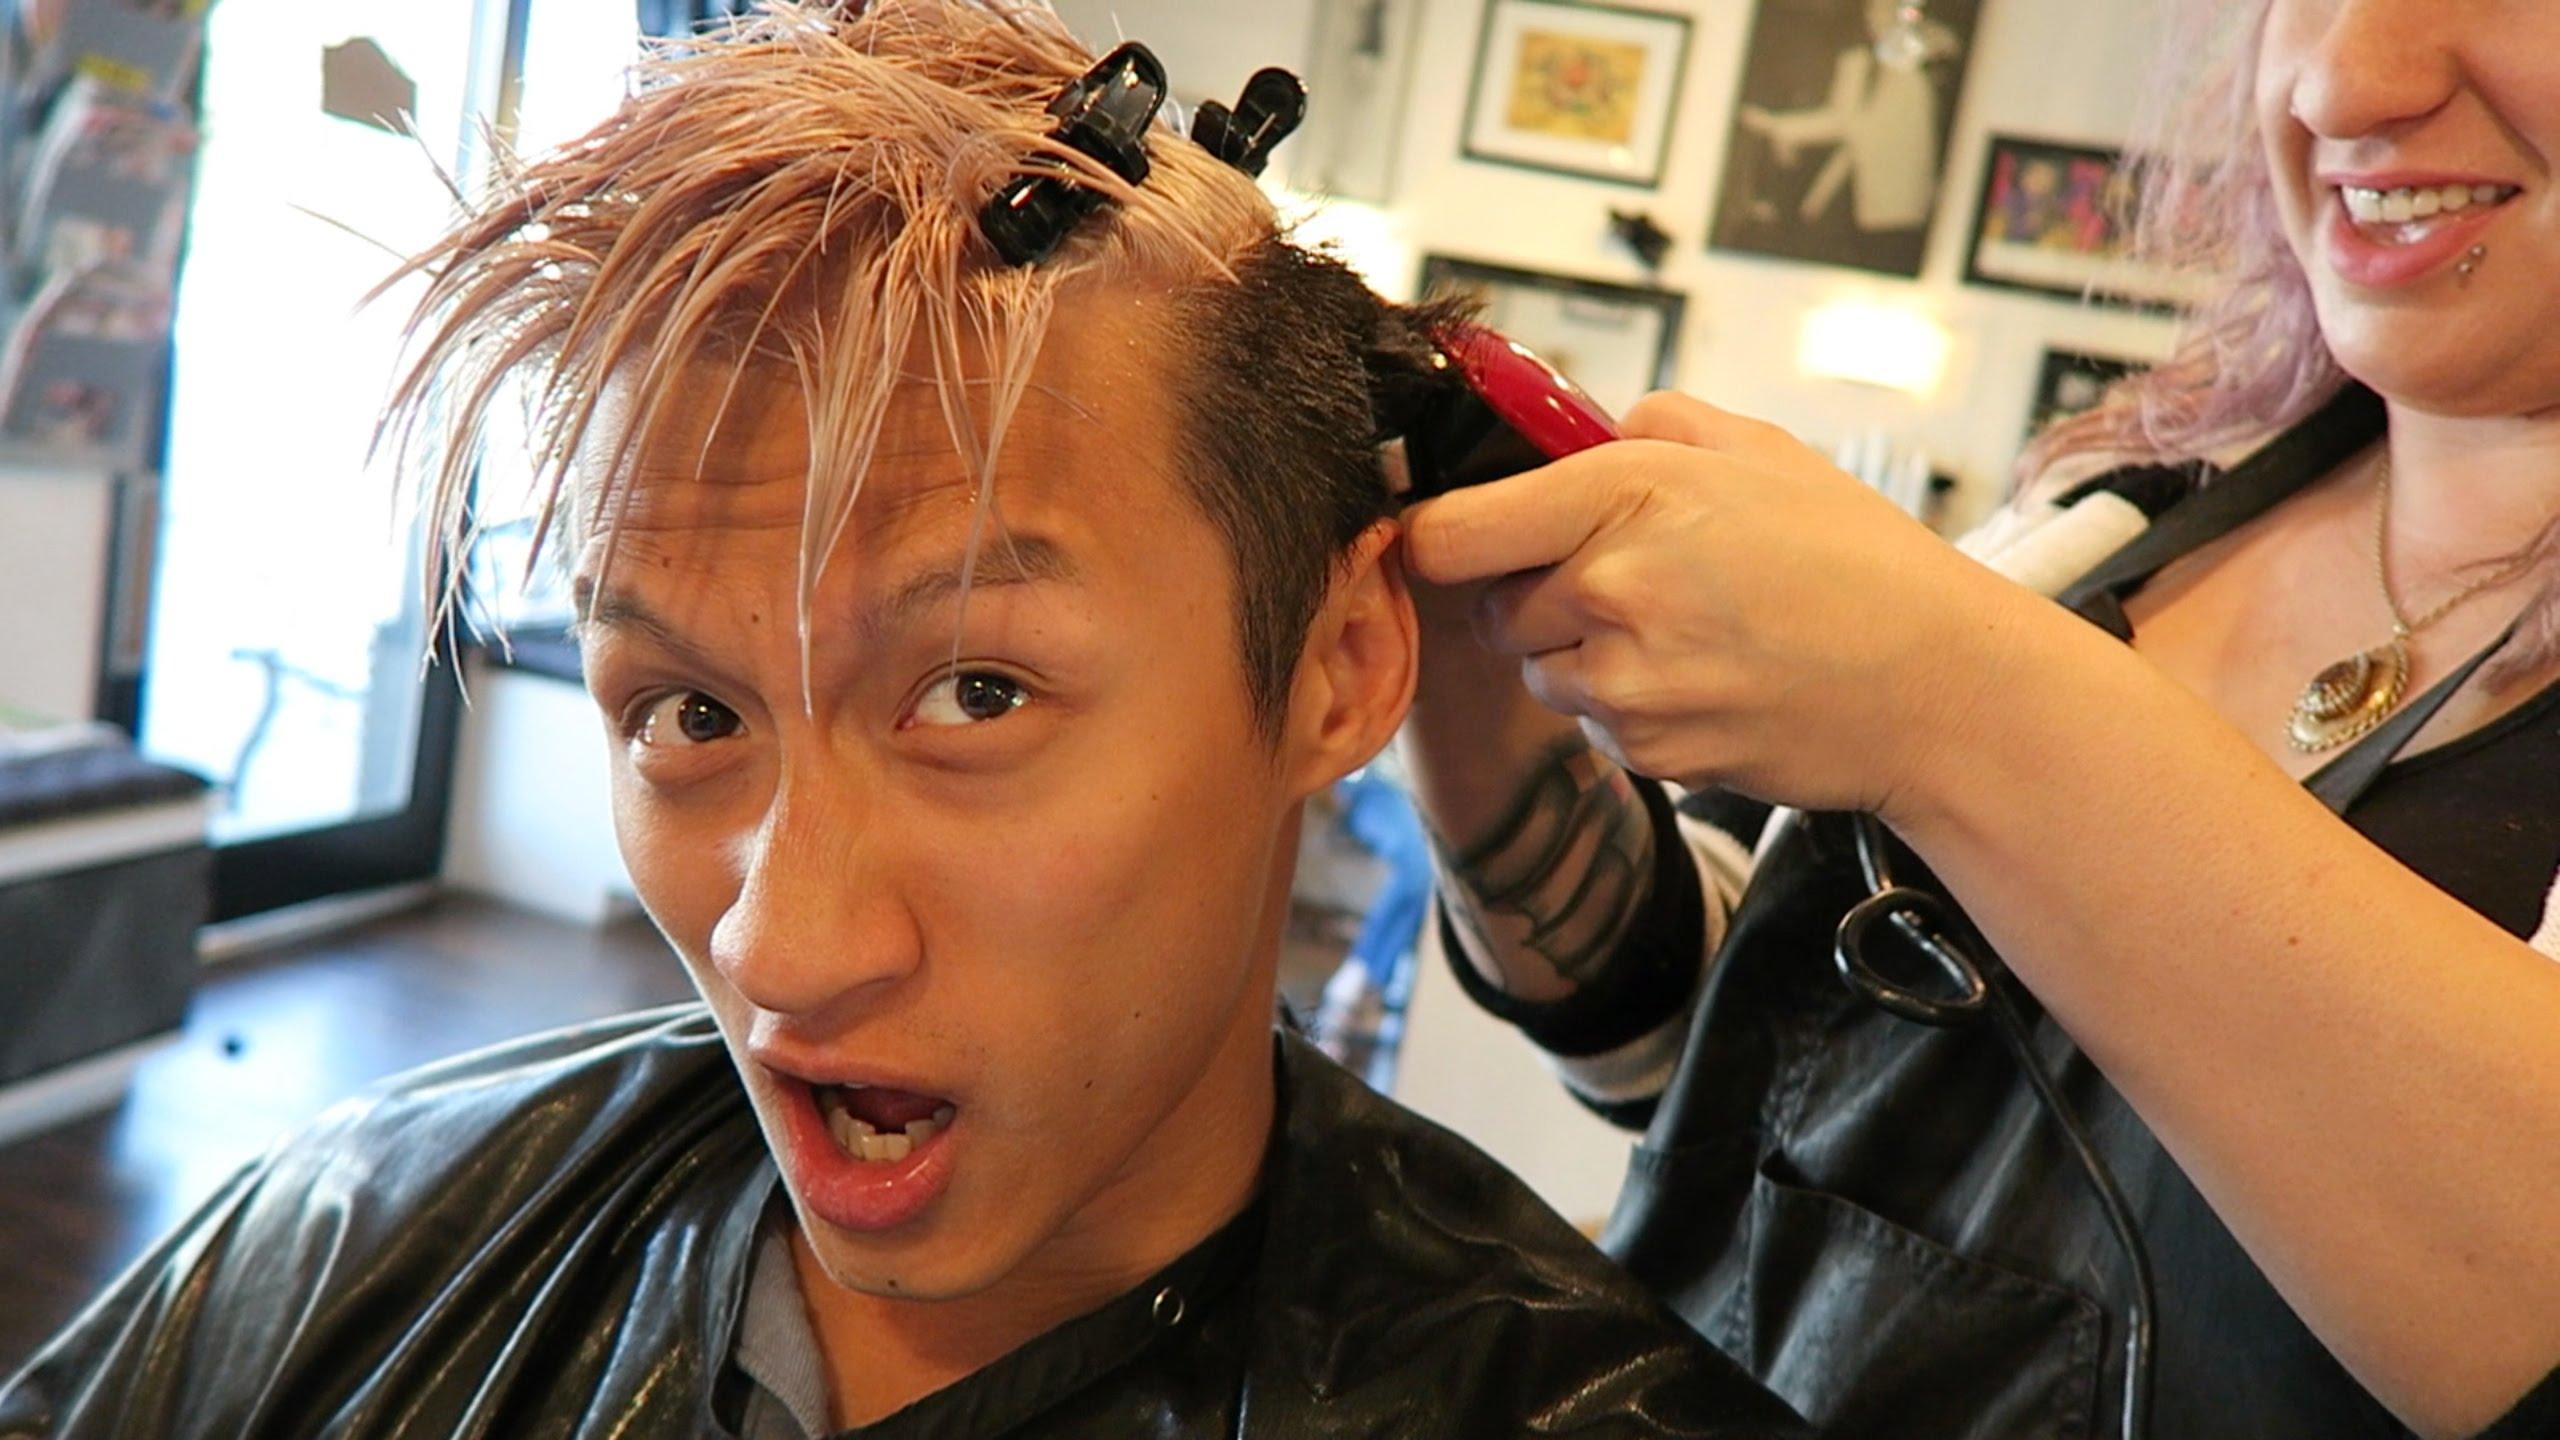 YouTube Star Josh Paler Lin's Hairdressing Pictures